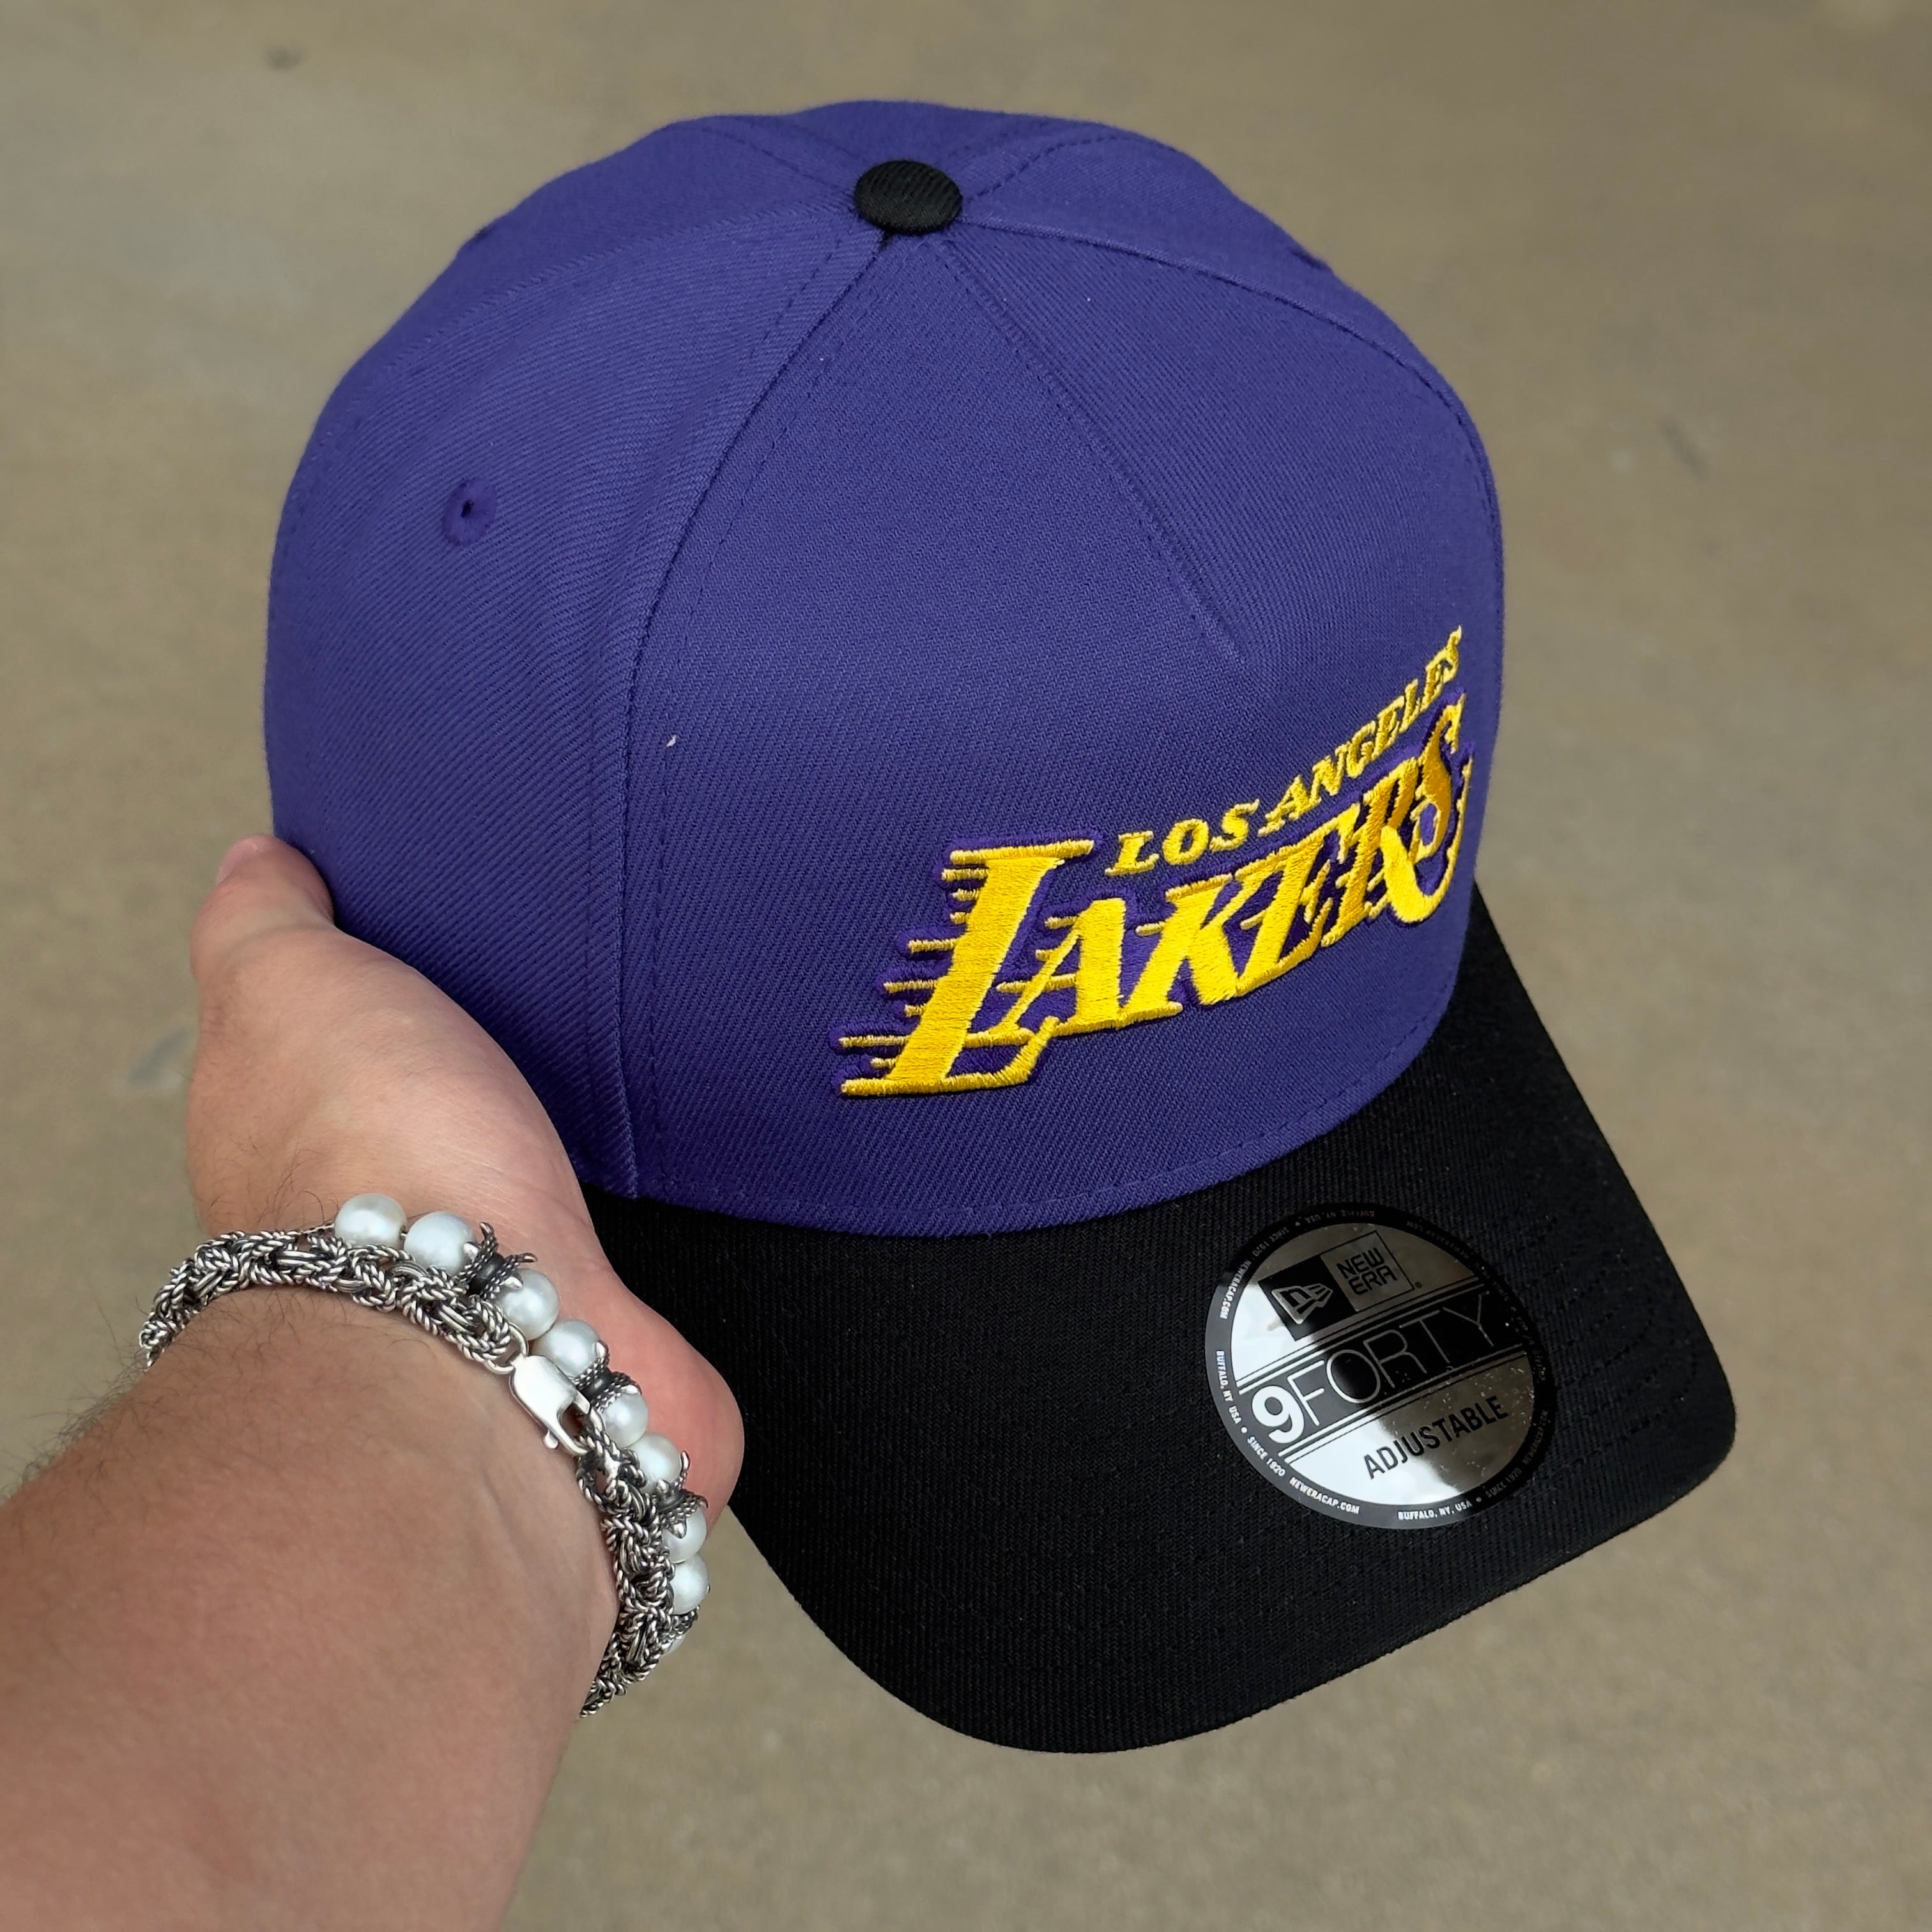 NEW Purple Los Angeles Lakers Simple Basic New Era 9Forty Adjustable One Size A-Frame